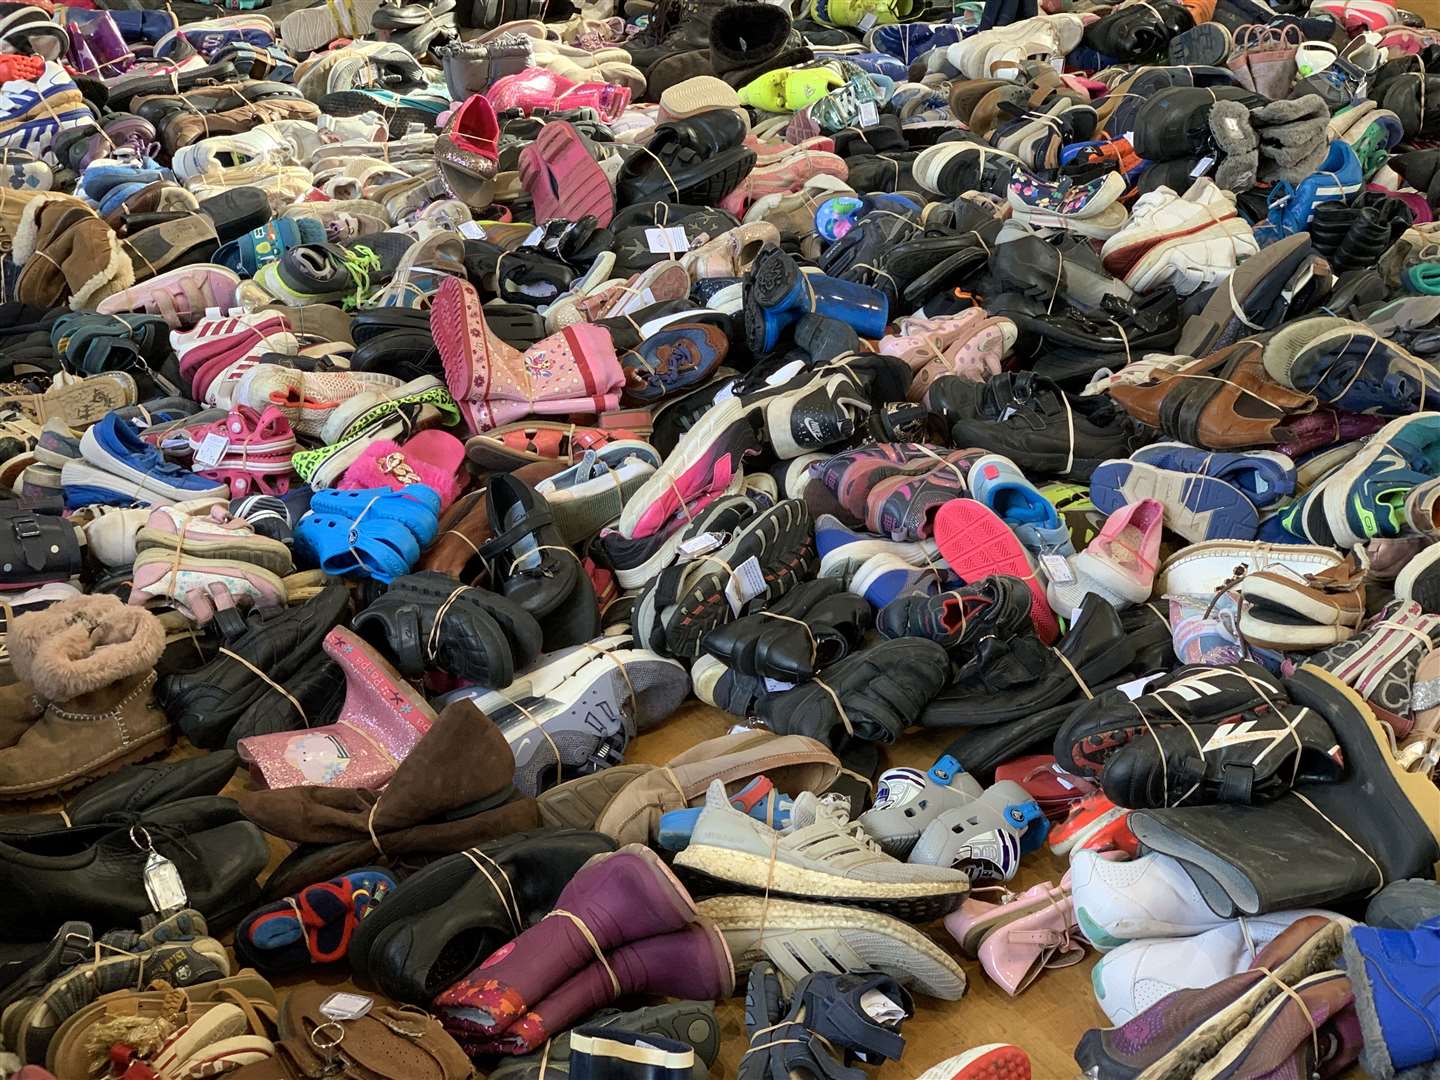 More than 1.5 million pairs of shoes have been collected since 2013